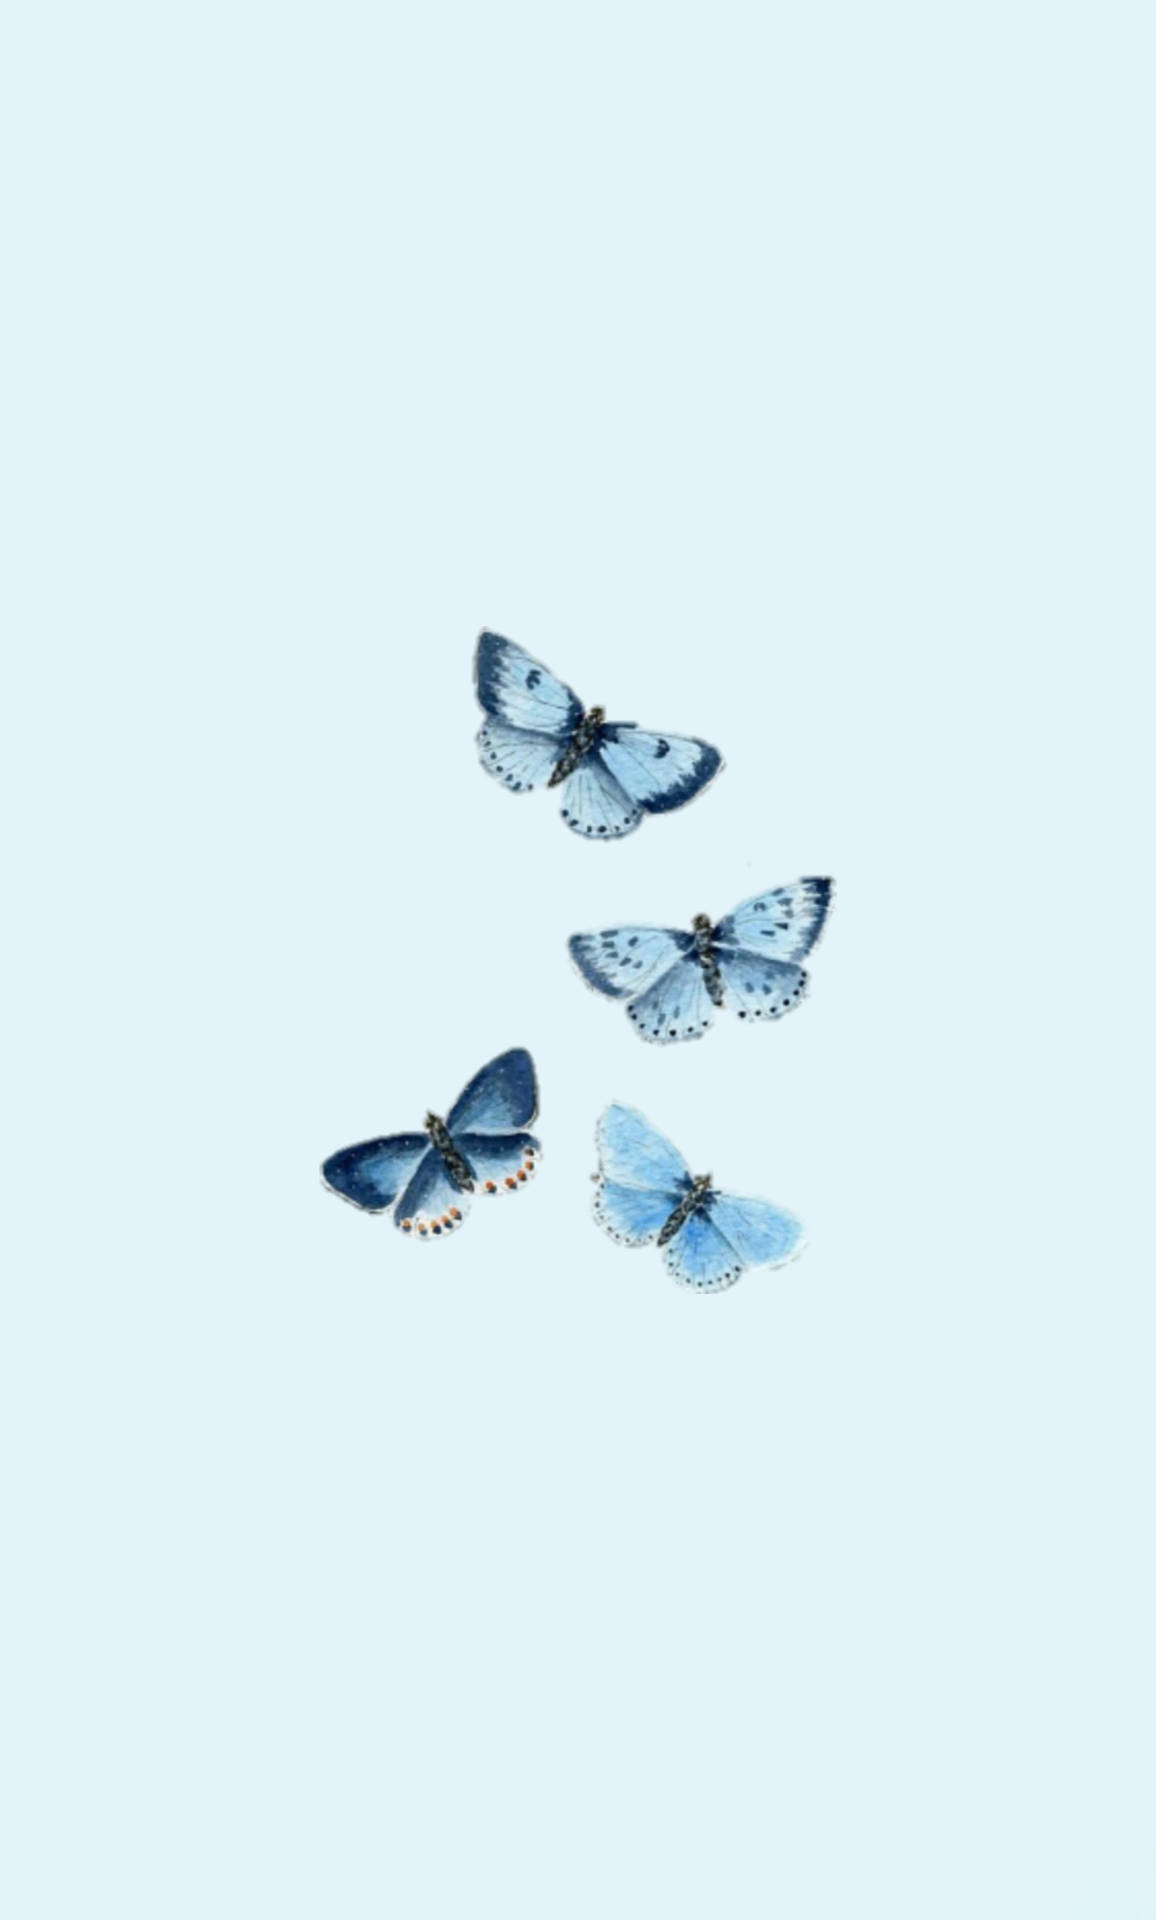 Butterfly Aesthetic Powder Blue Wings Background